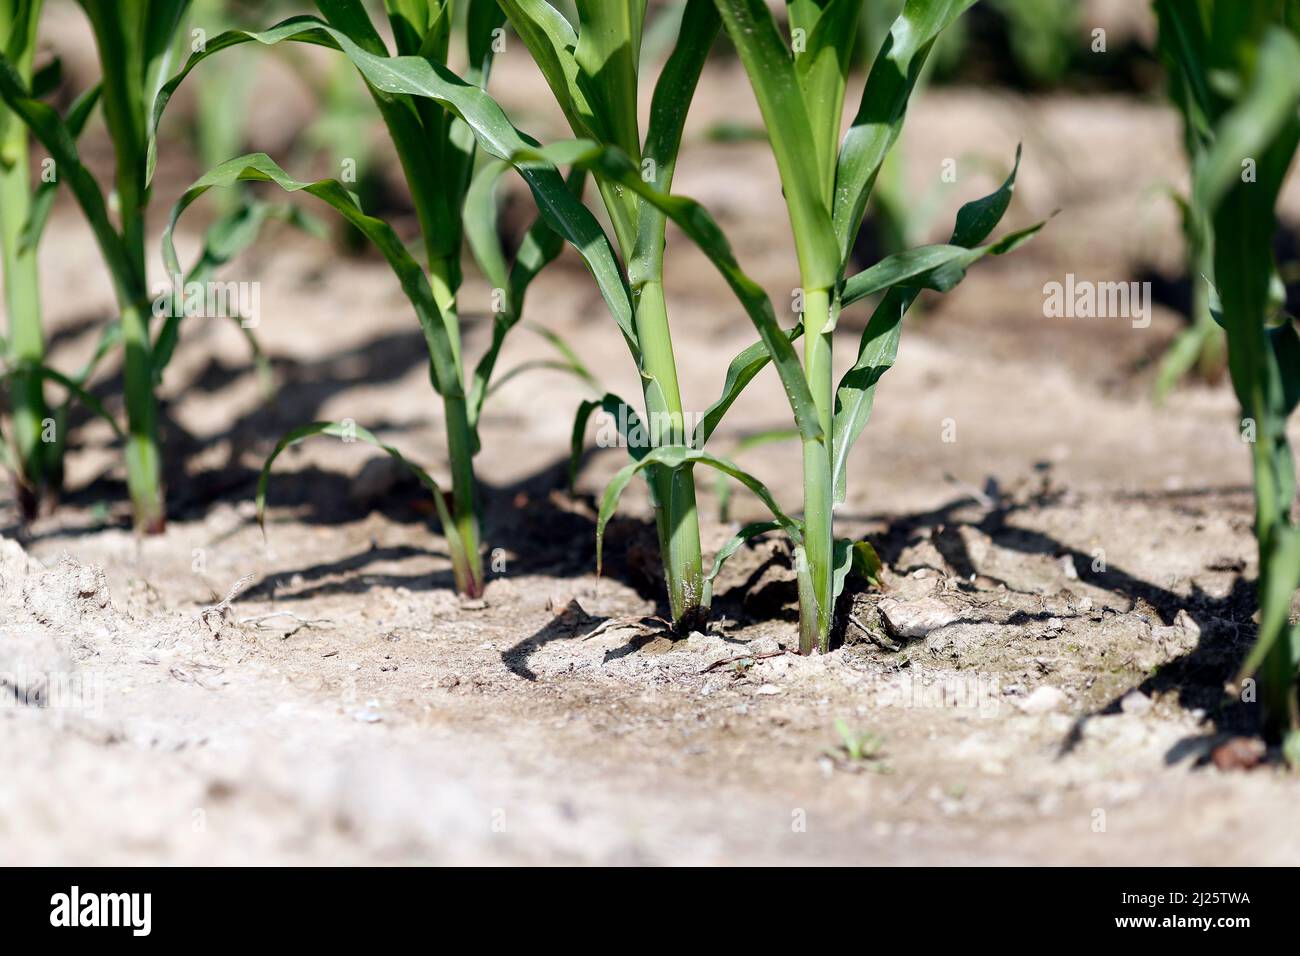 Corn field.  Cultivated plants and agriculture. Stock Photo